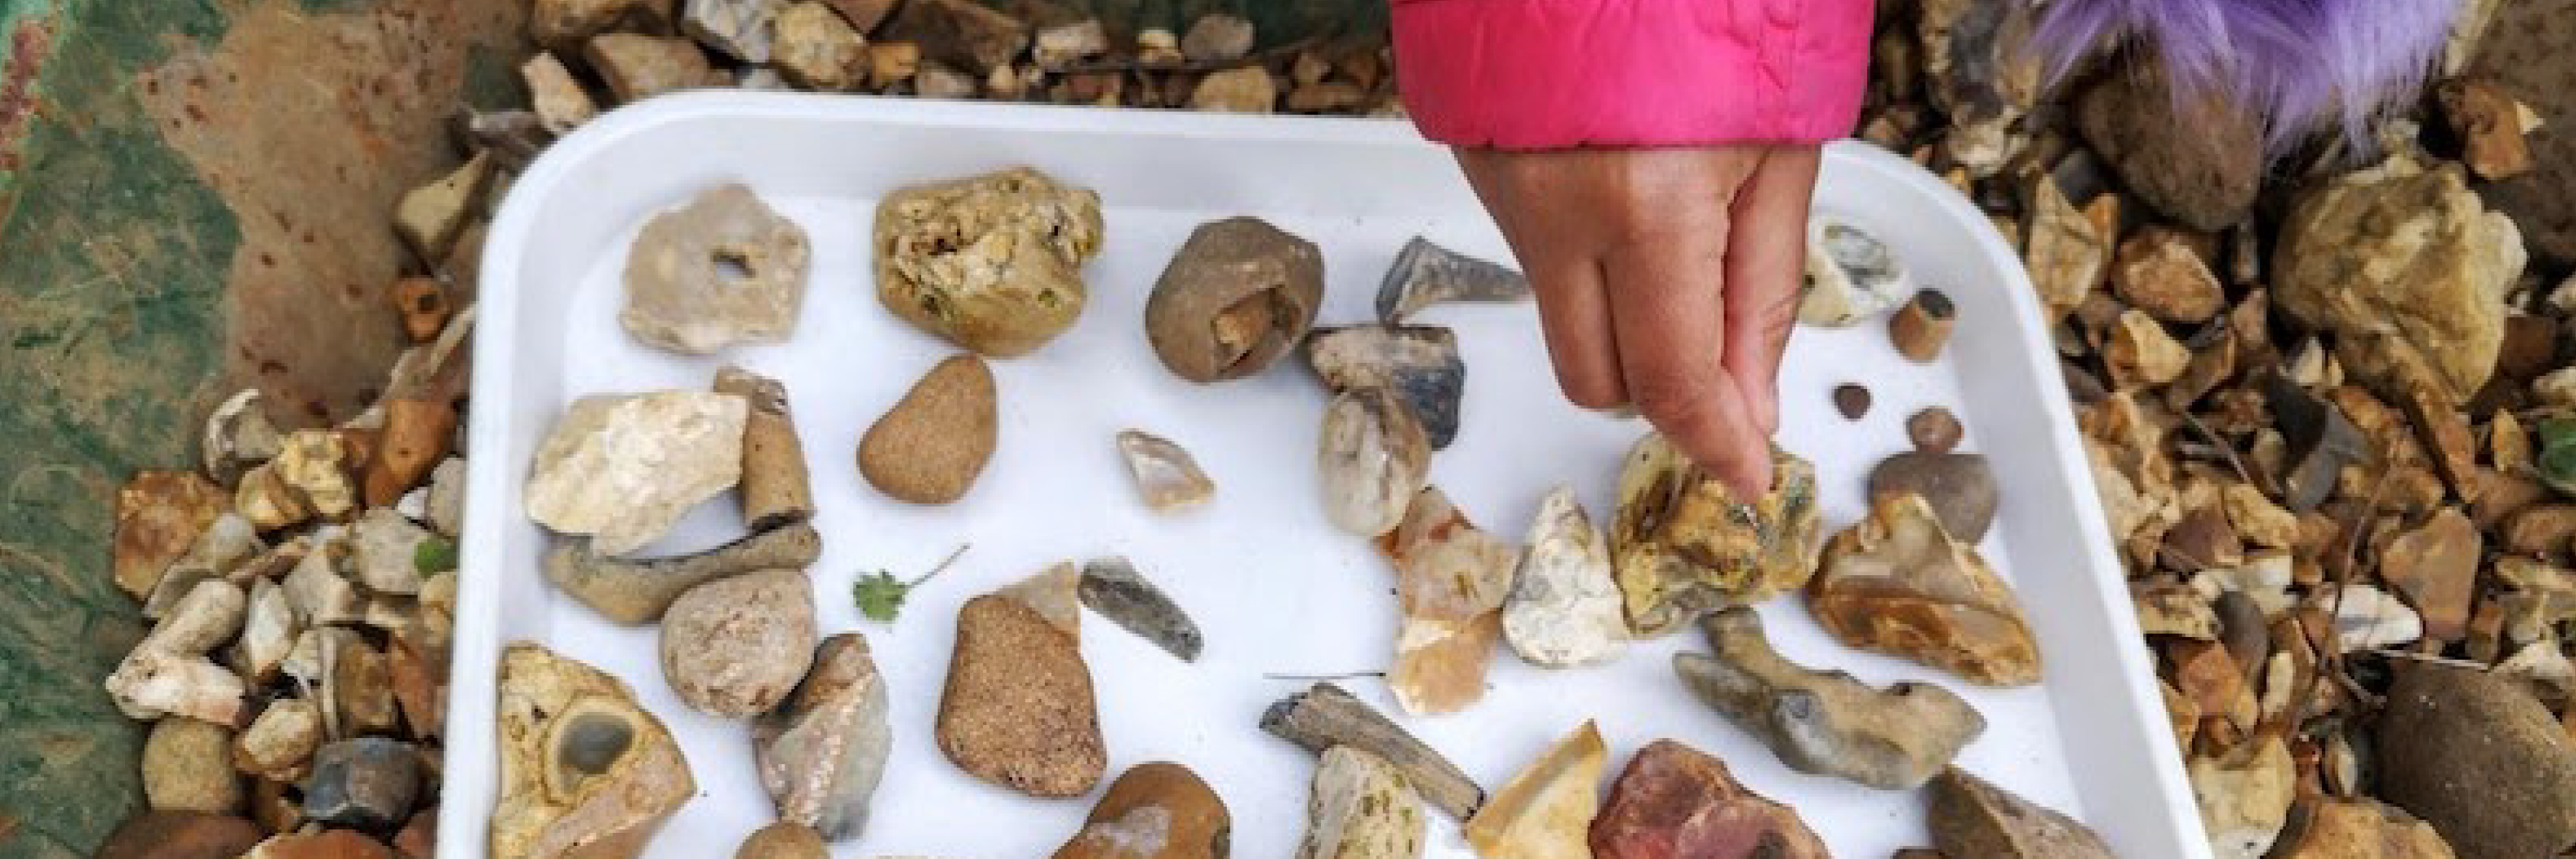 Image of a childs hand sorting through a tray of gravel, looking for fossils